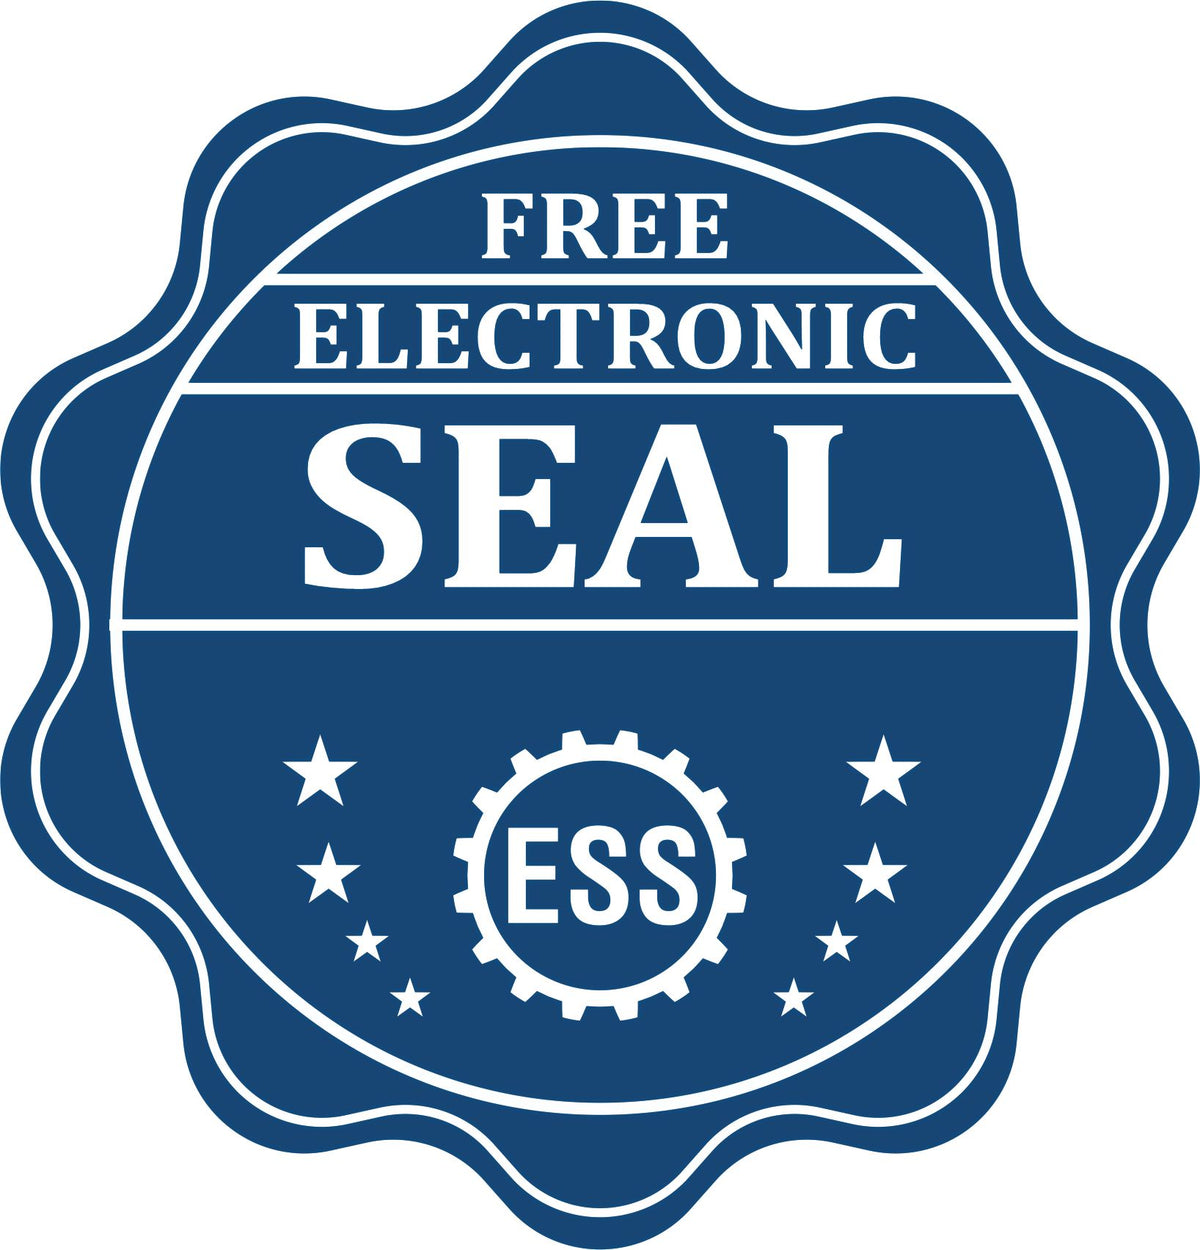 A badge showing a free electronic seal for the Soft South Carolina Professional Engineer Seal with stars and the ESS gear on the emblem.